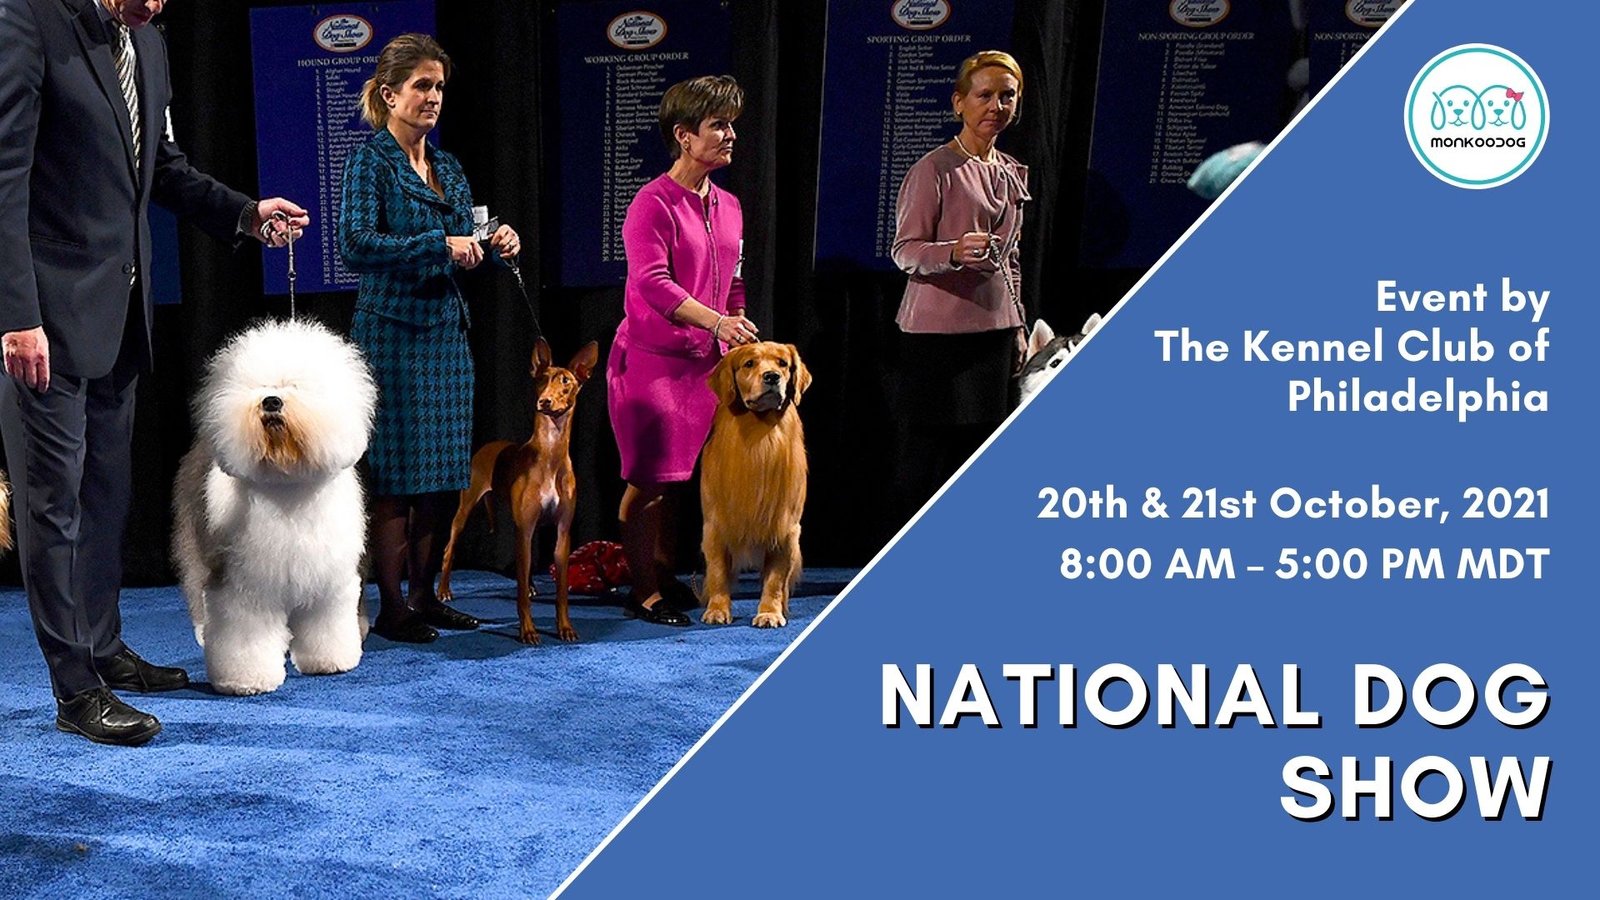 National Dog Show 2021 By The Kennel Club of Philadelphia